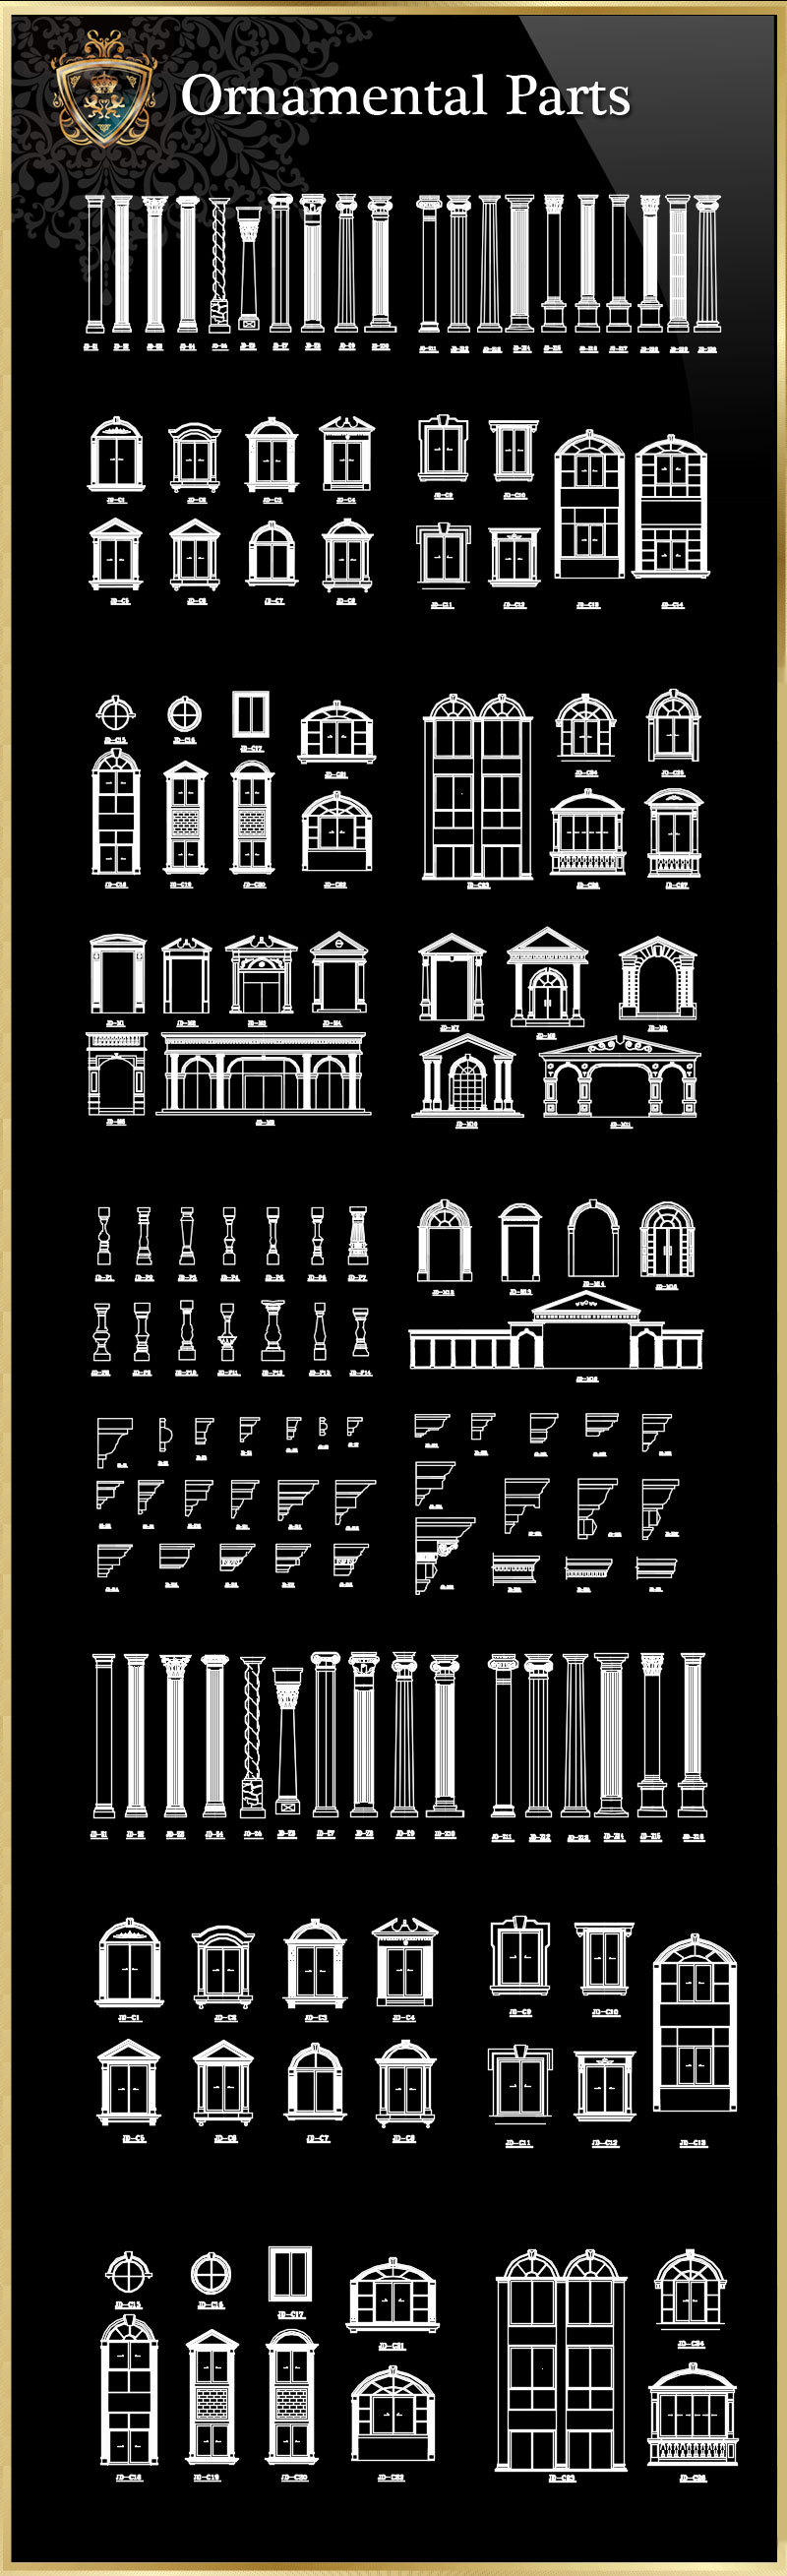 ★【Ornamental Parts of Buildings 7】Download Luxury Architectural Design CAD Drawings--Over 20000+ High quality CAD Blocks and Drawings Download!